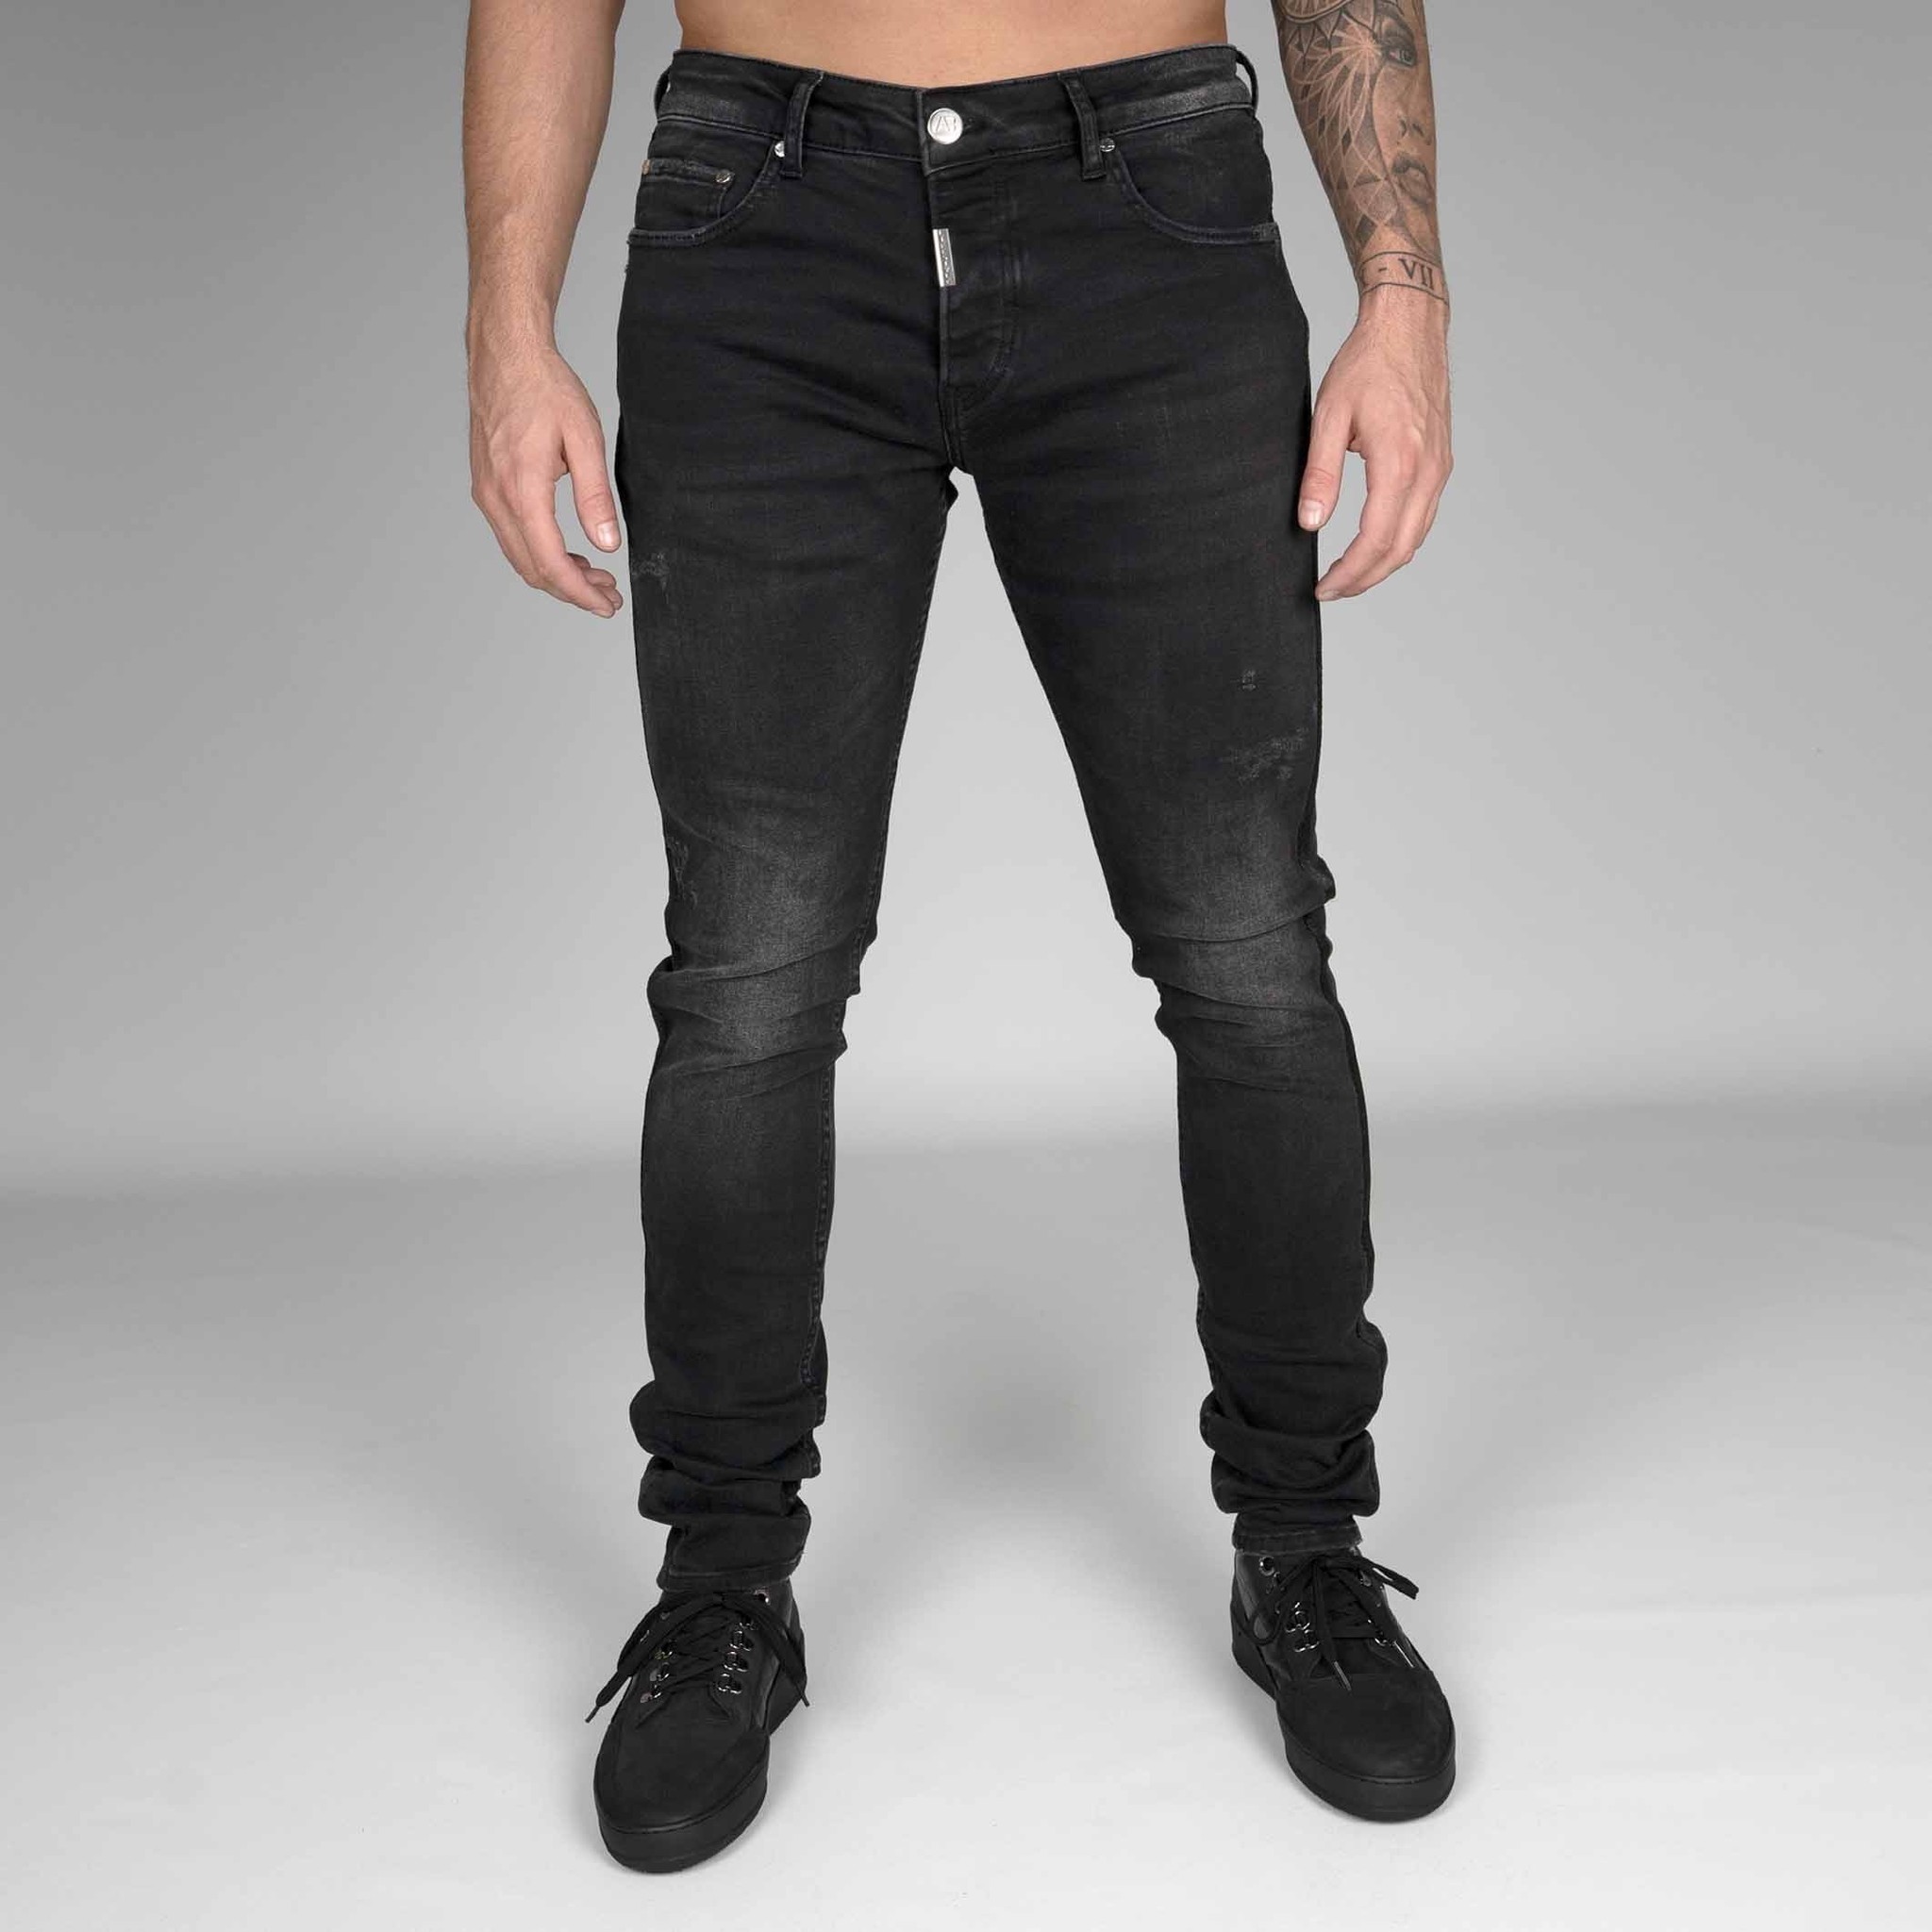 AB Lifestyle - Stretch Jeans Taped Pocket - Donker Grijs - Concept R